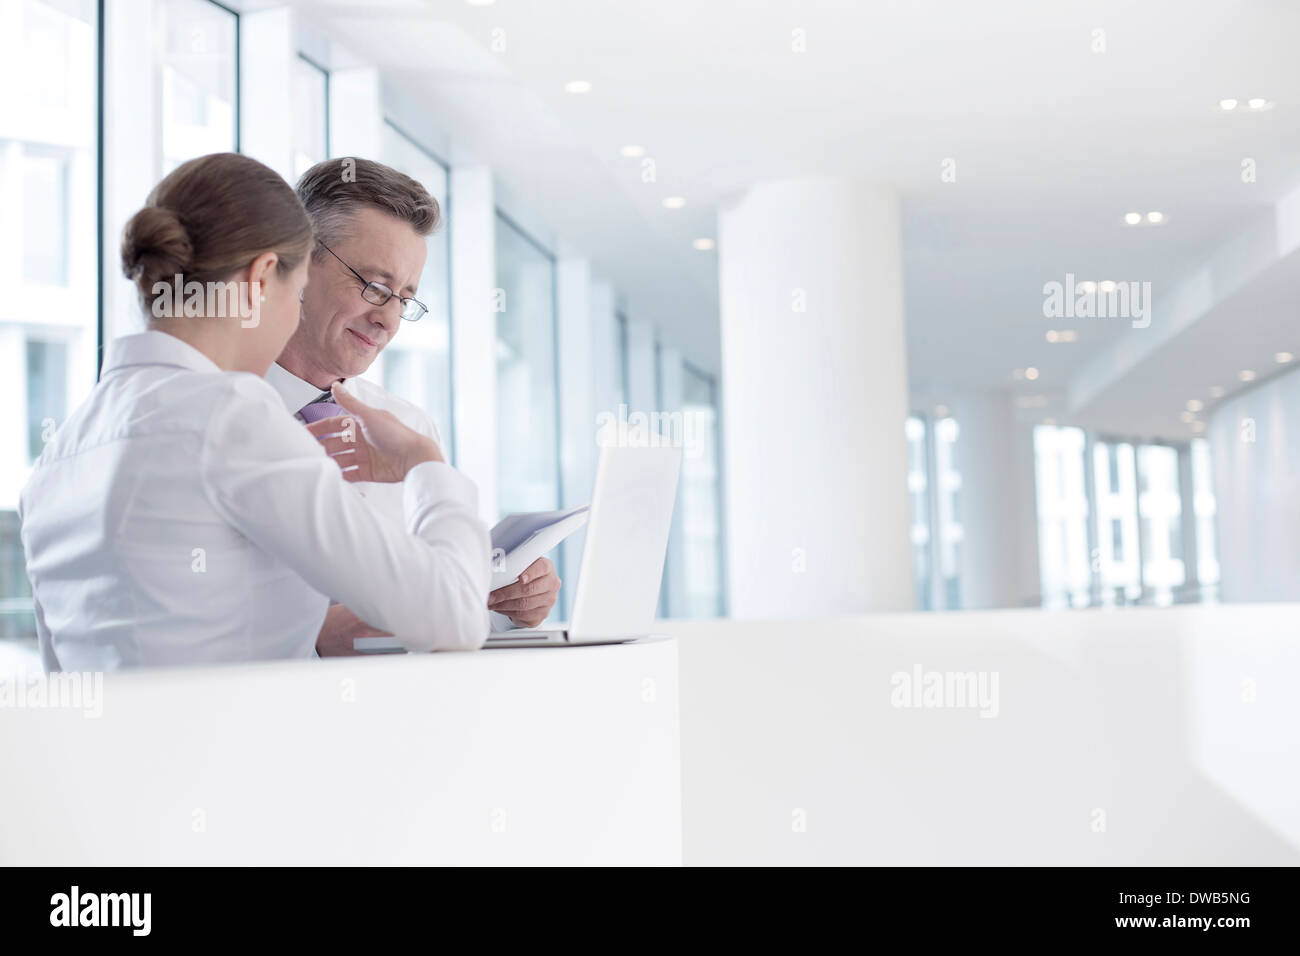 Business people working at railing in office Stock Photo